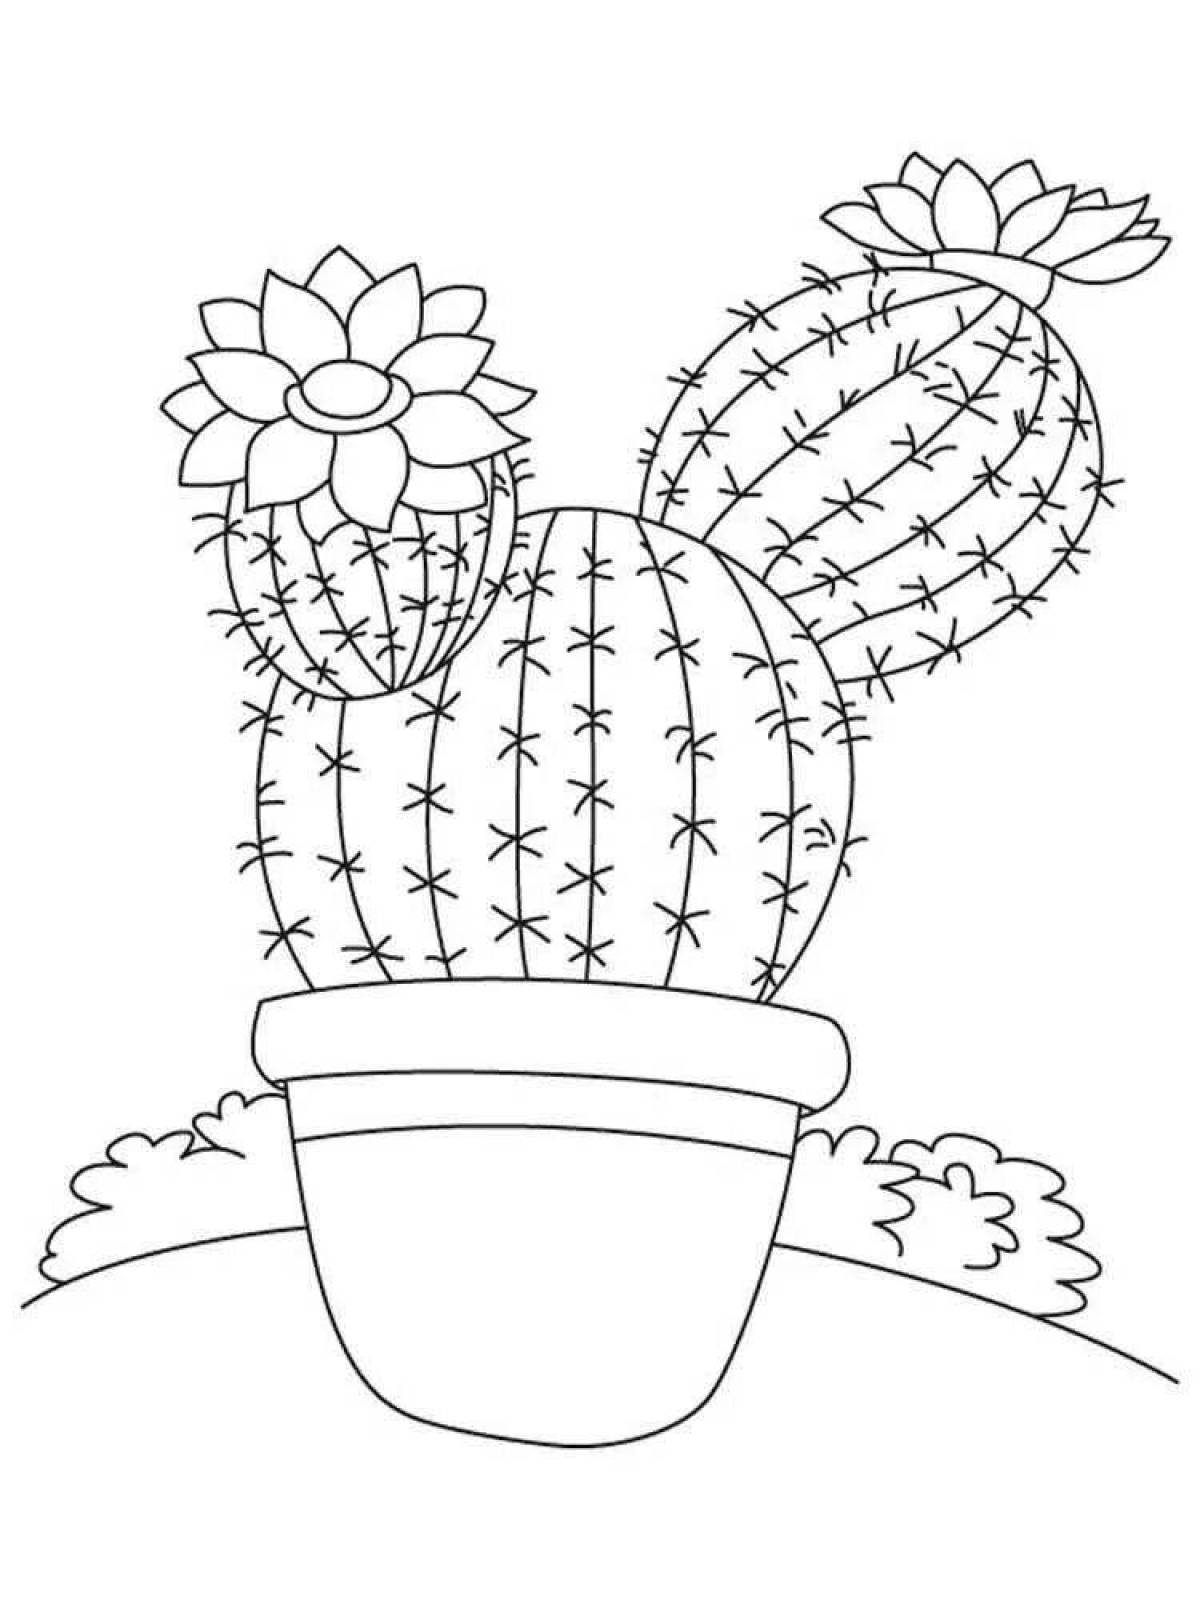 Colorful houseplants coloring page for 4-5 year olds